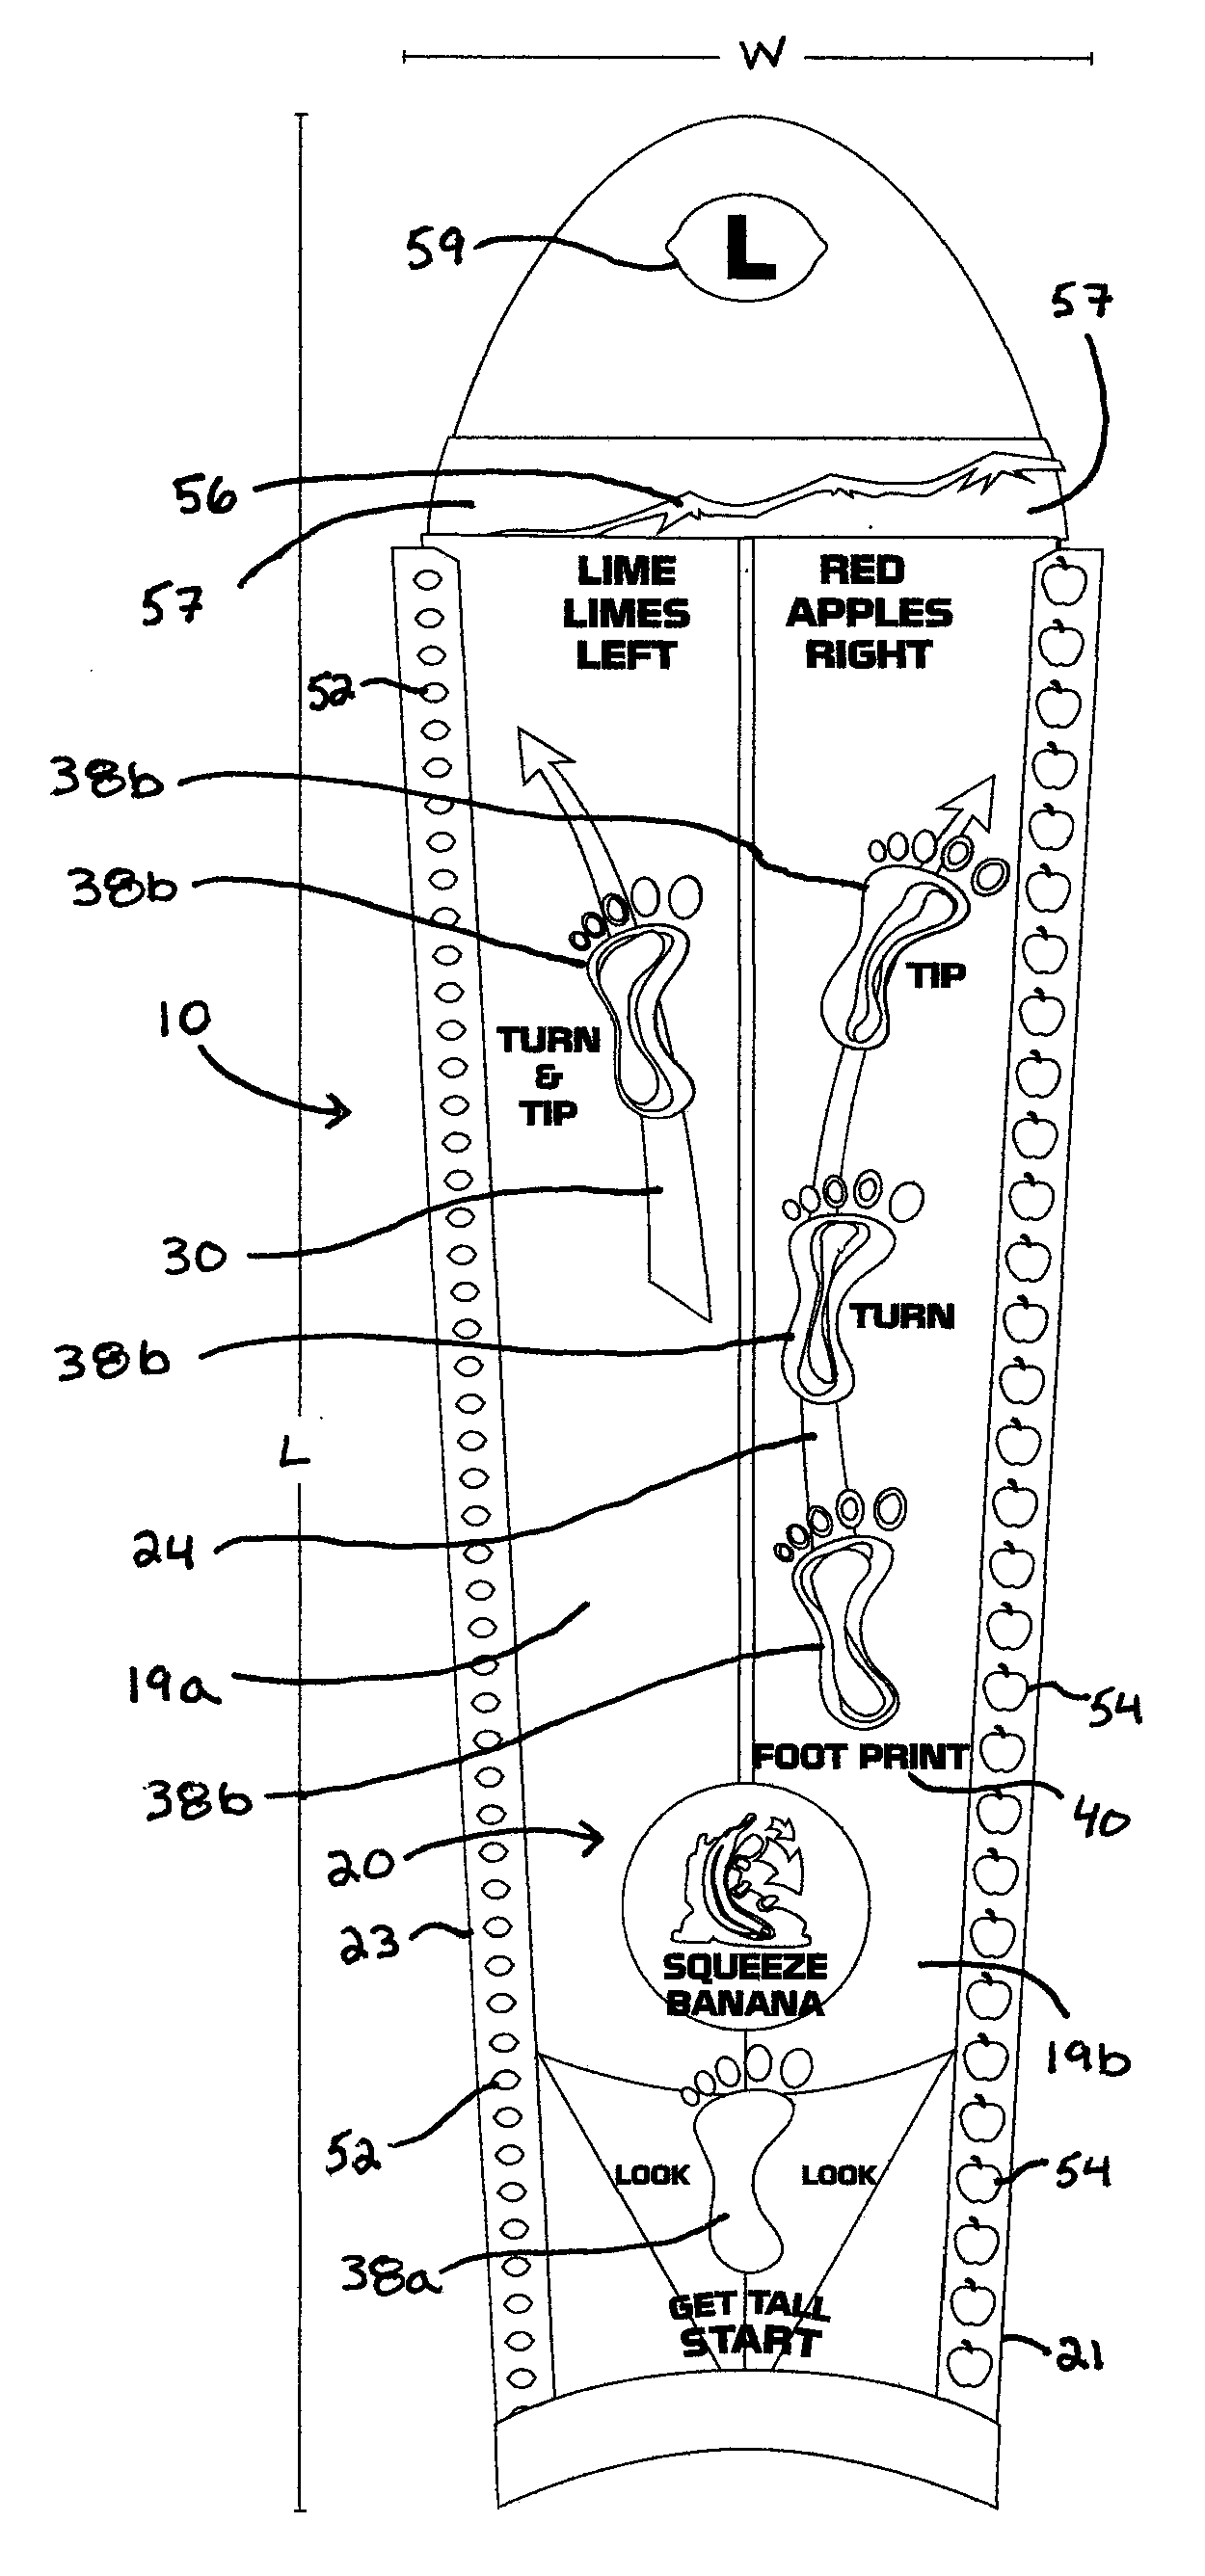 System, Apparatus and Method for Teaching Skiing, Snowboarding, and the Like